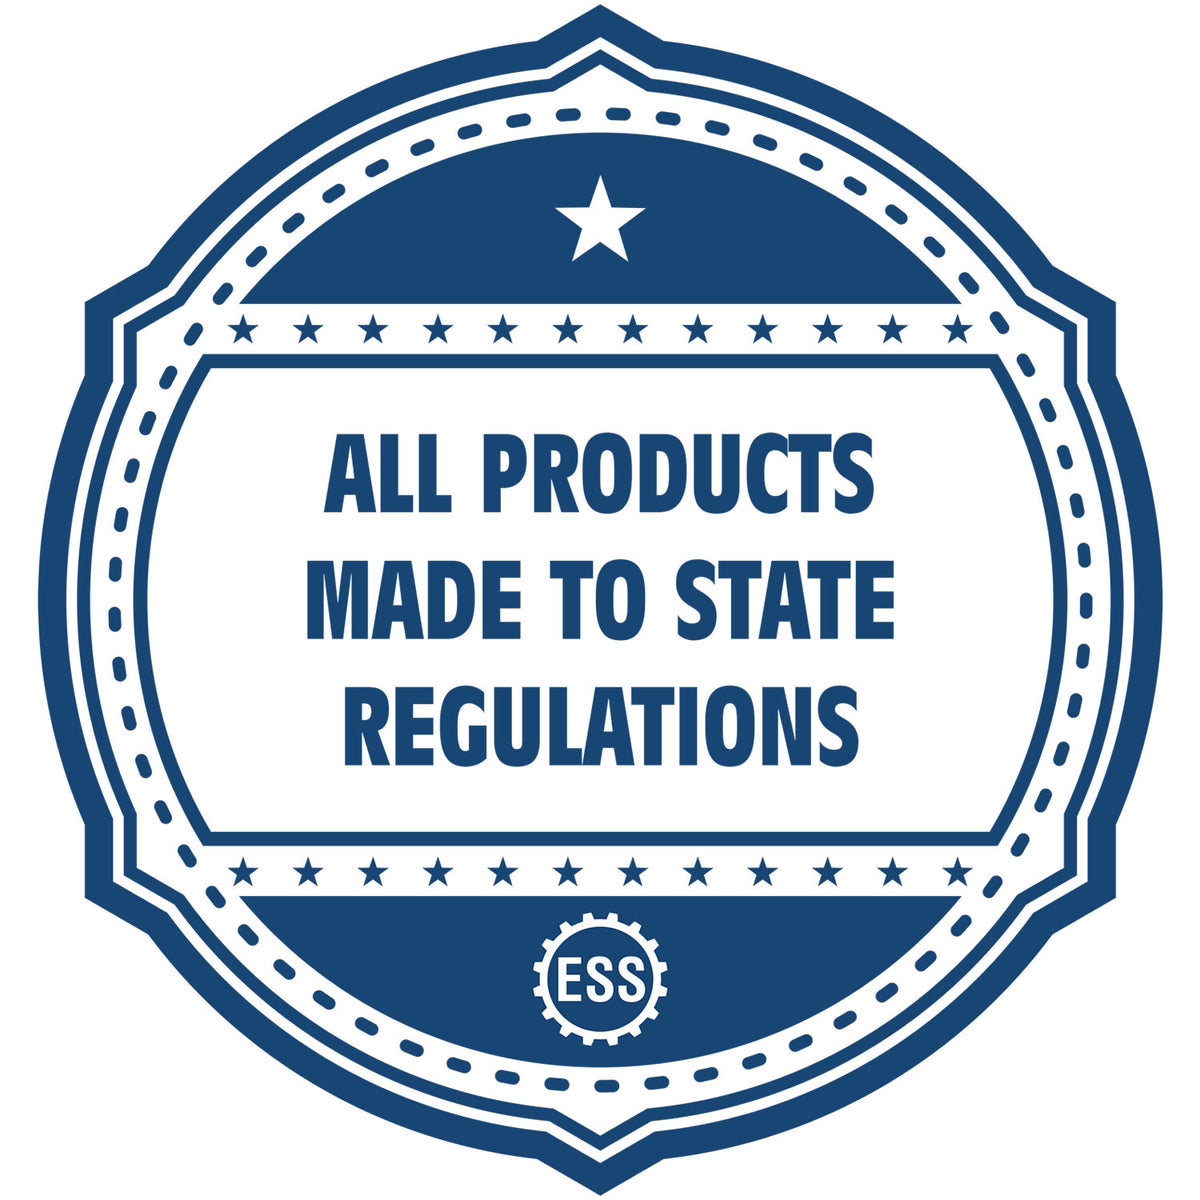 An icon or badge element for the Soft Minnesota Professional Engineer Seal showing that this product is made in compliance with state regulations.